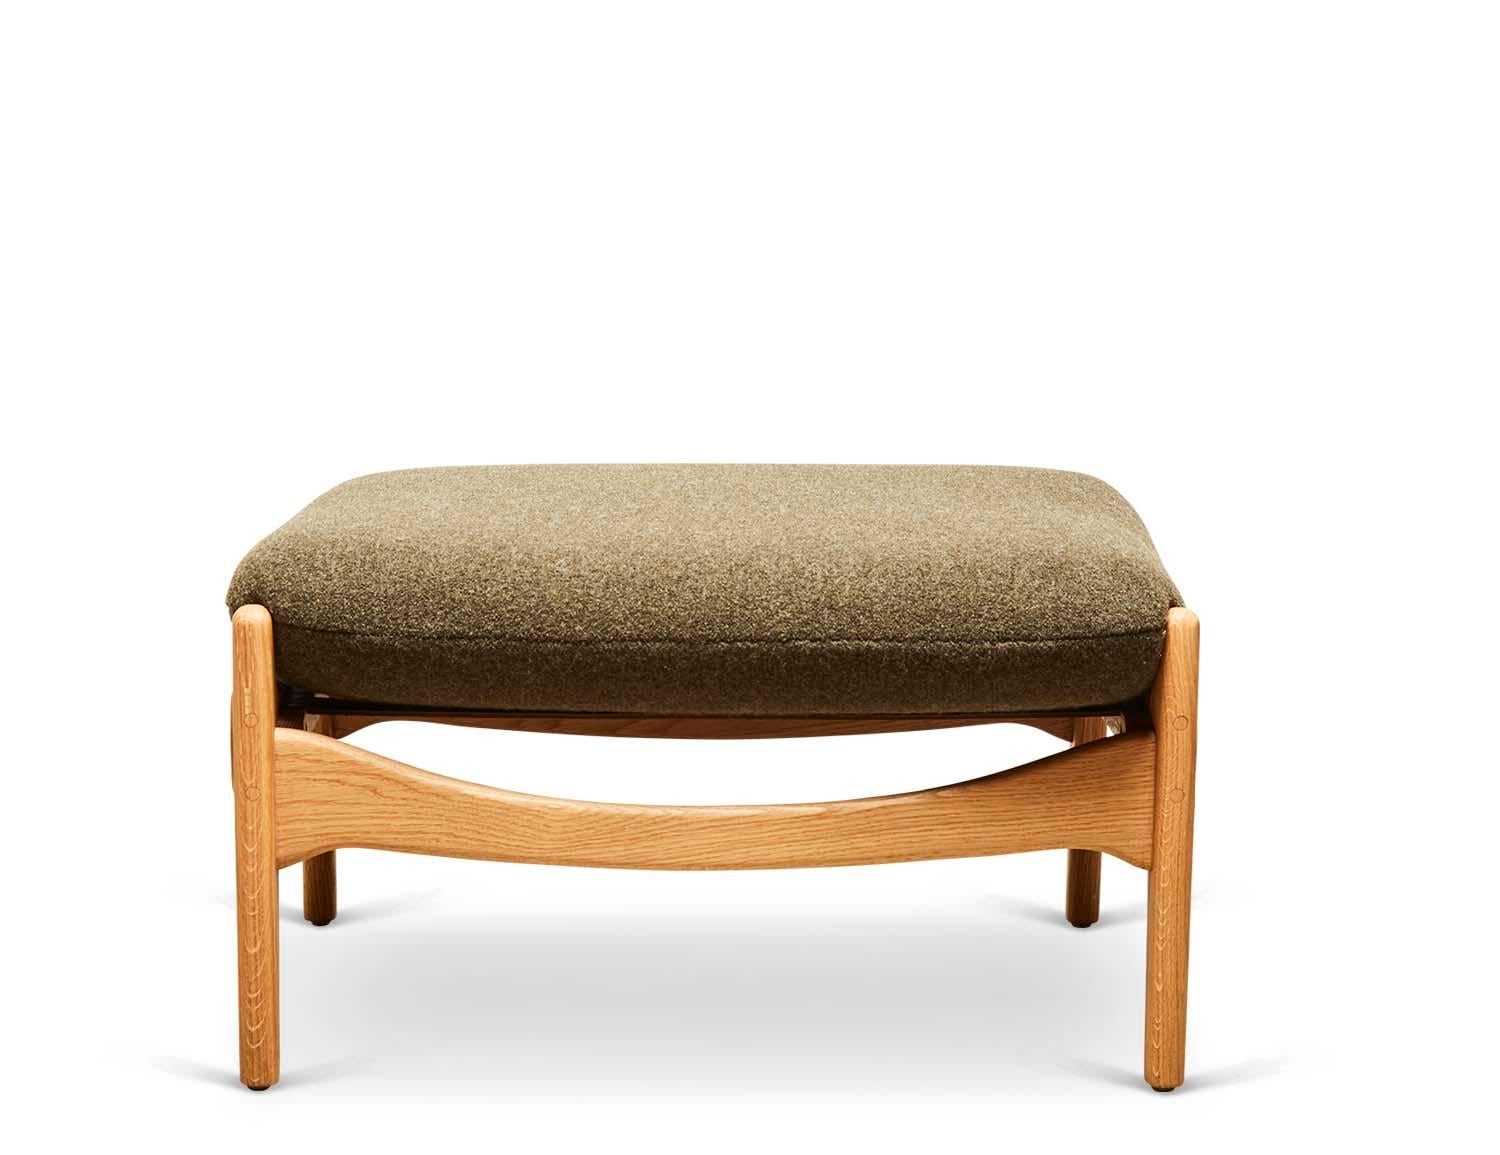 The Maker's ottoman has a solid walnut or oak frame, with a leather sling and loose cushion. Shown here in Oiled oak and dark green boiled wool.

The Lawson-Fenning collection is designed and handmade in Los Angeles, California. Reach out to